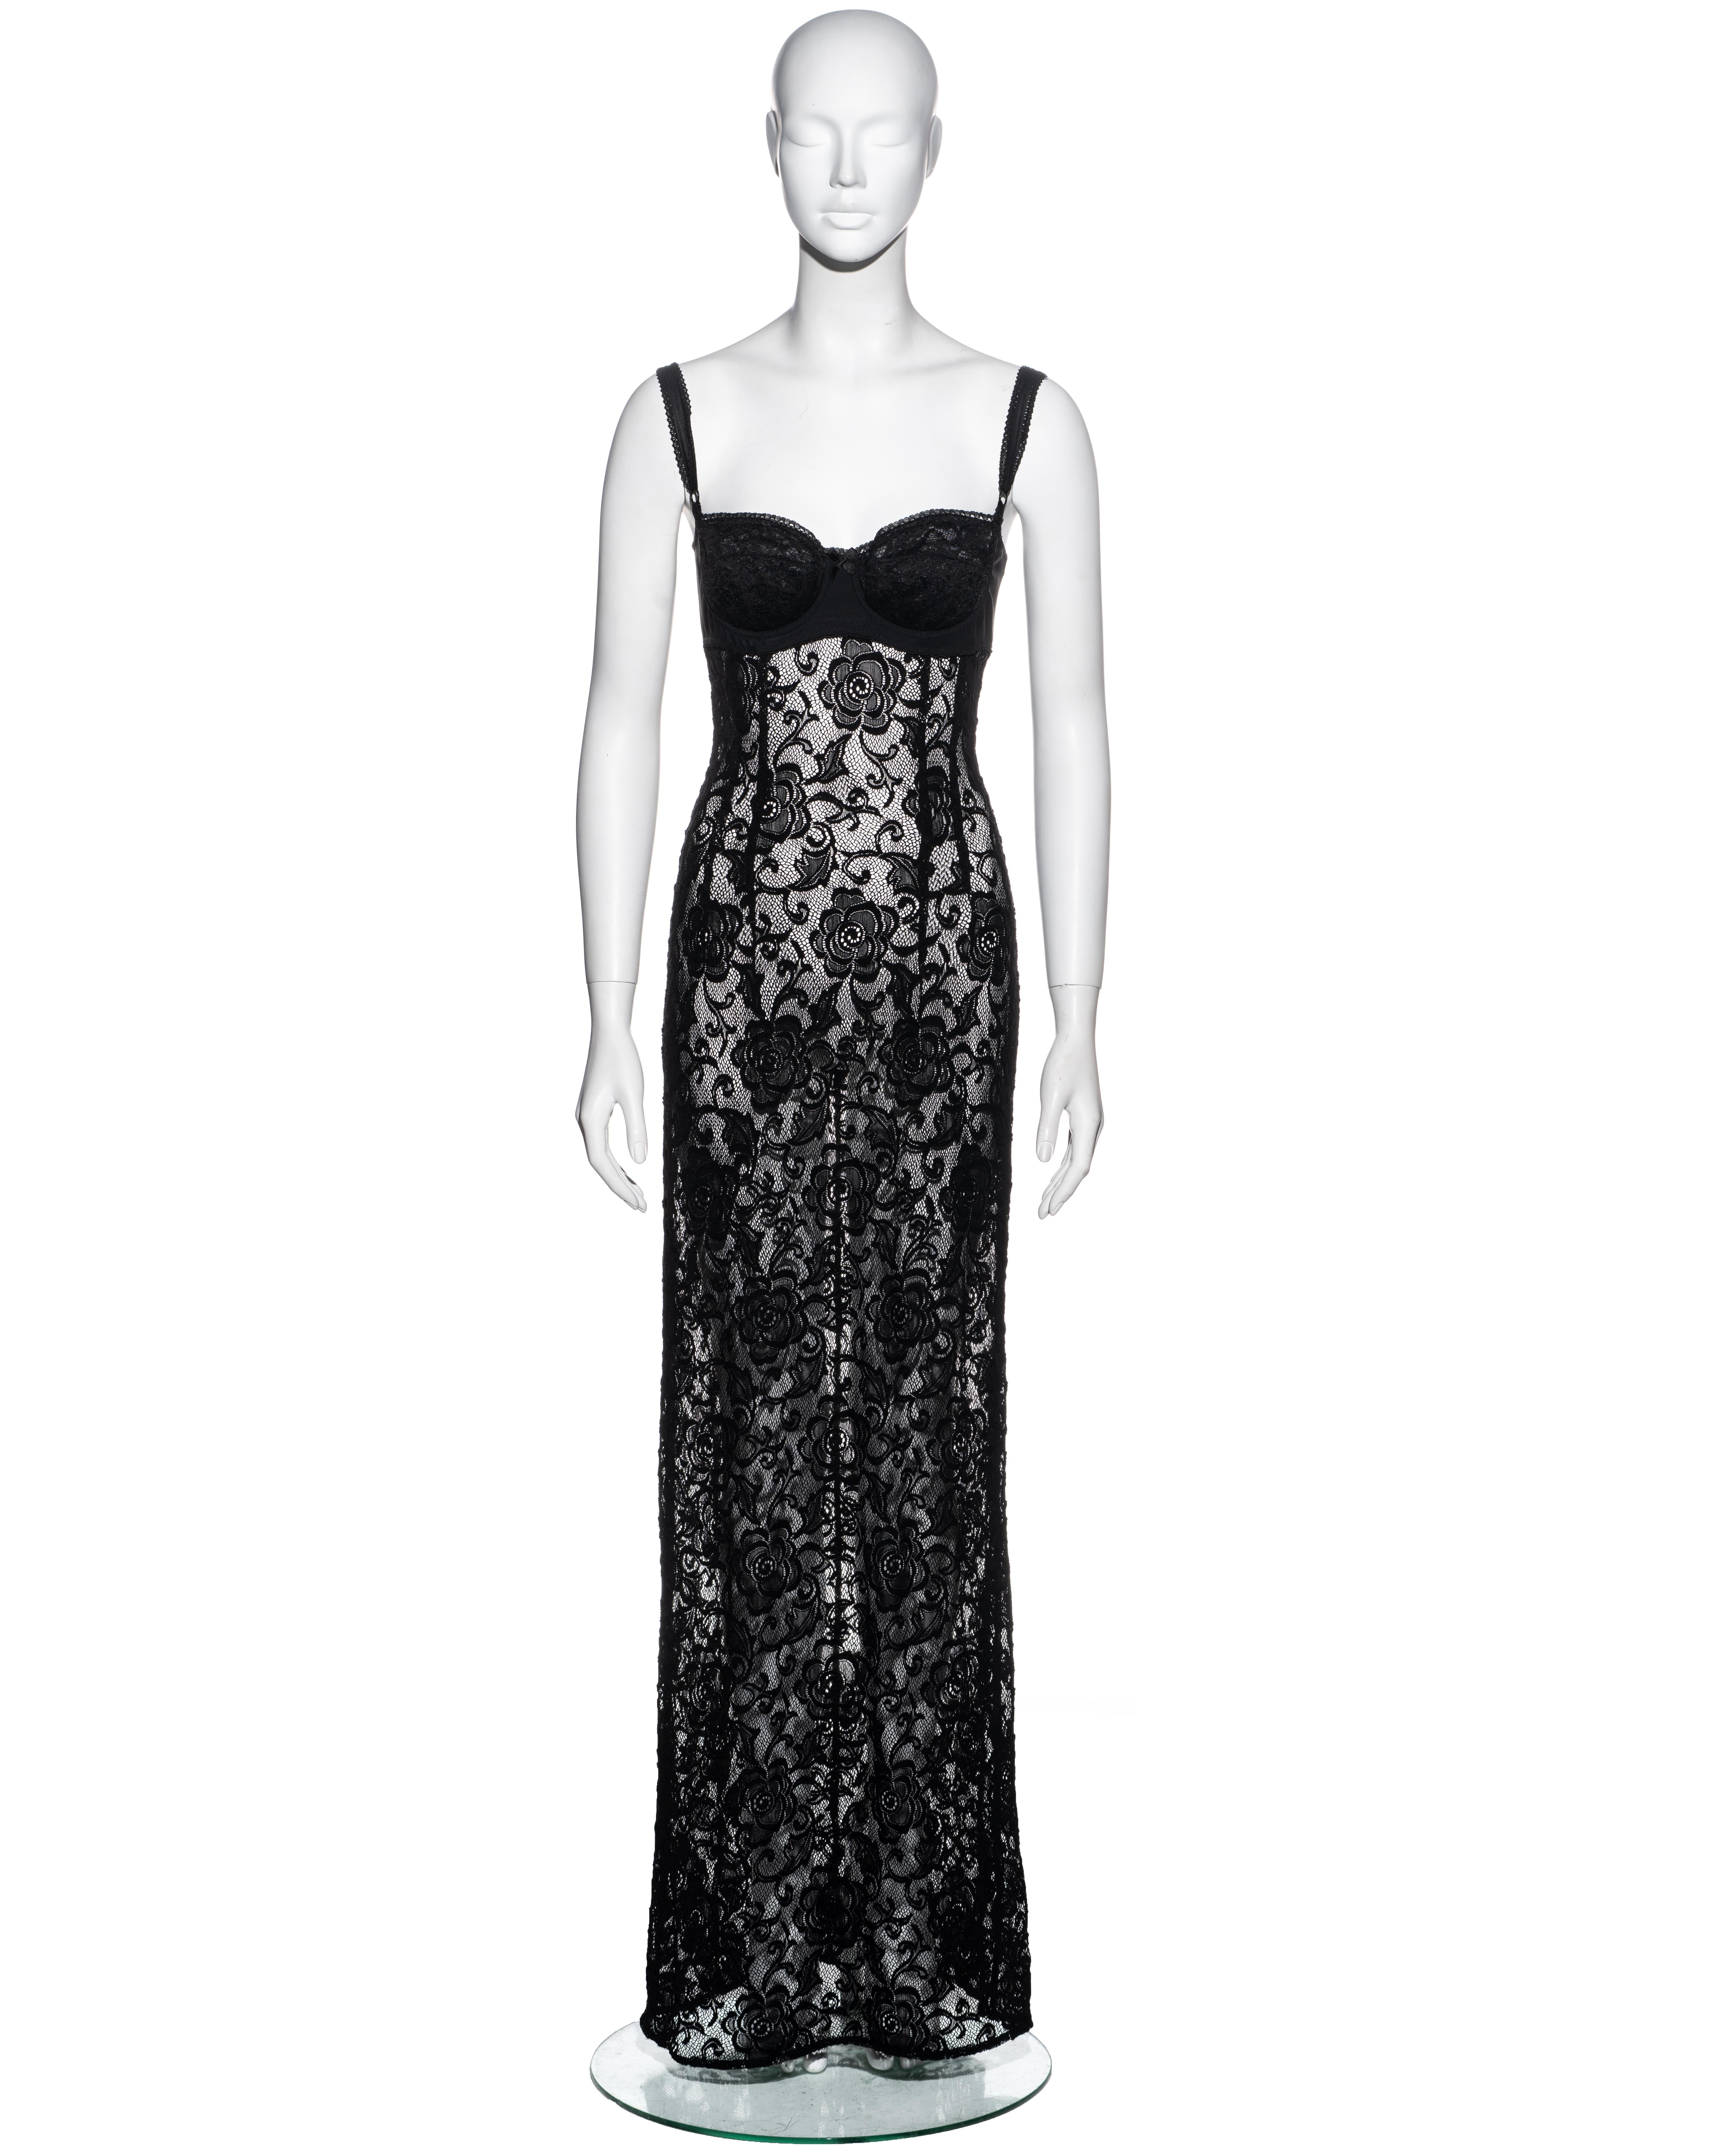 ▪ Dolce & Gabbana black lace maxi dress
▪ Attached bra with spandex band 
▪ Cut-out back 
▪ Concealed zip fastening 
▪ Small / Medium 
▪ Spring-Summer 1997